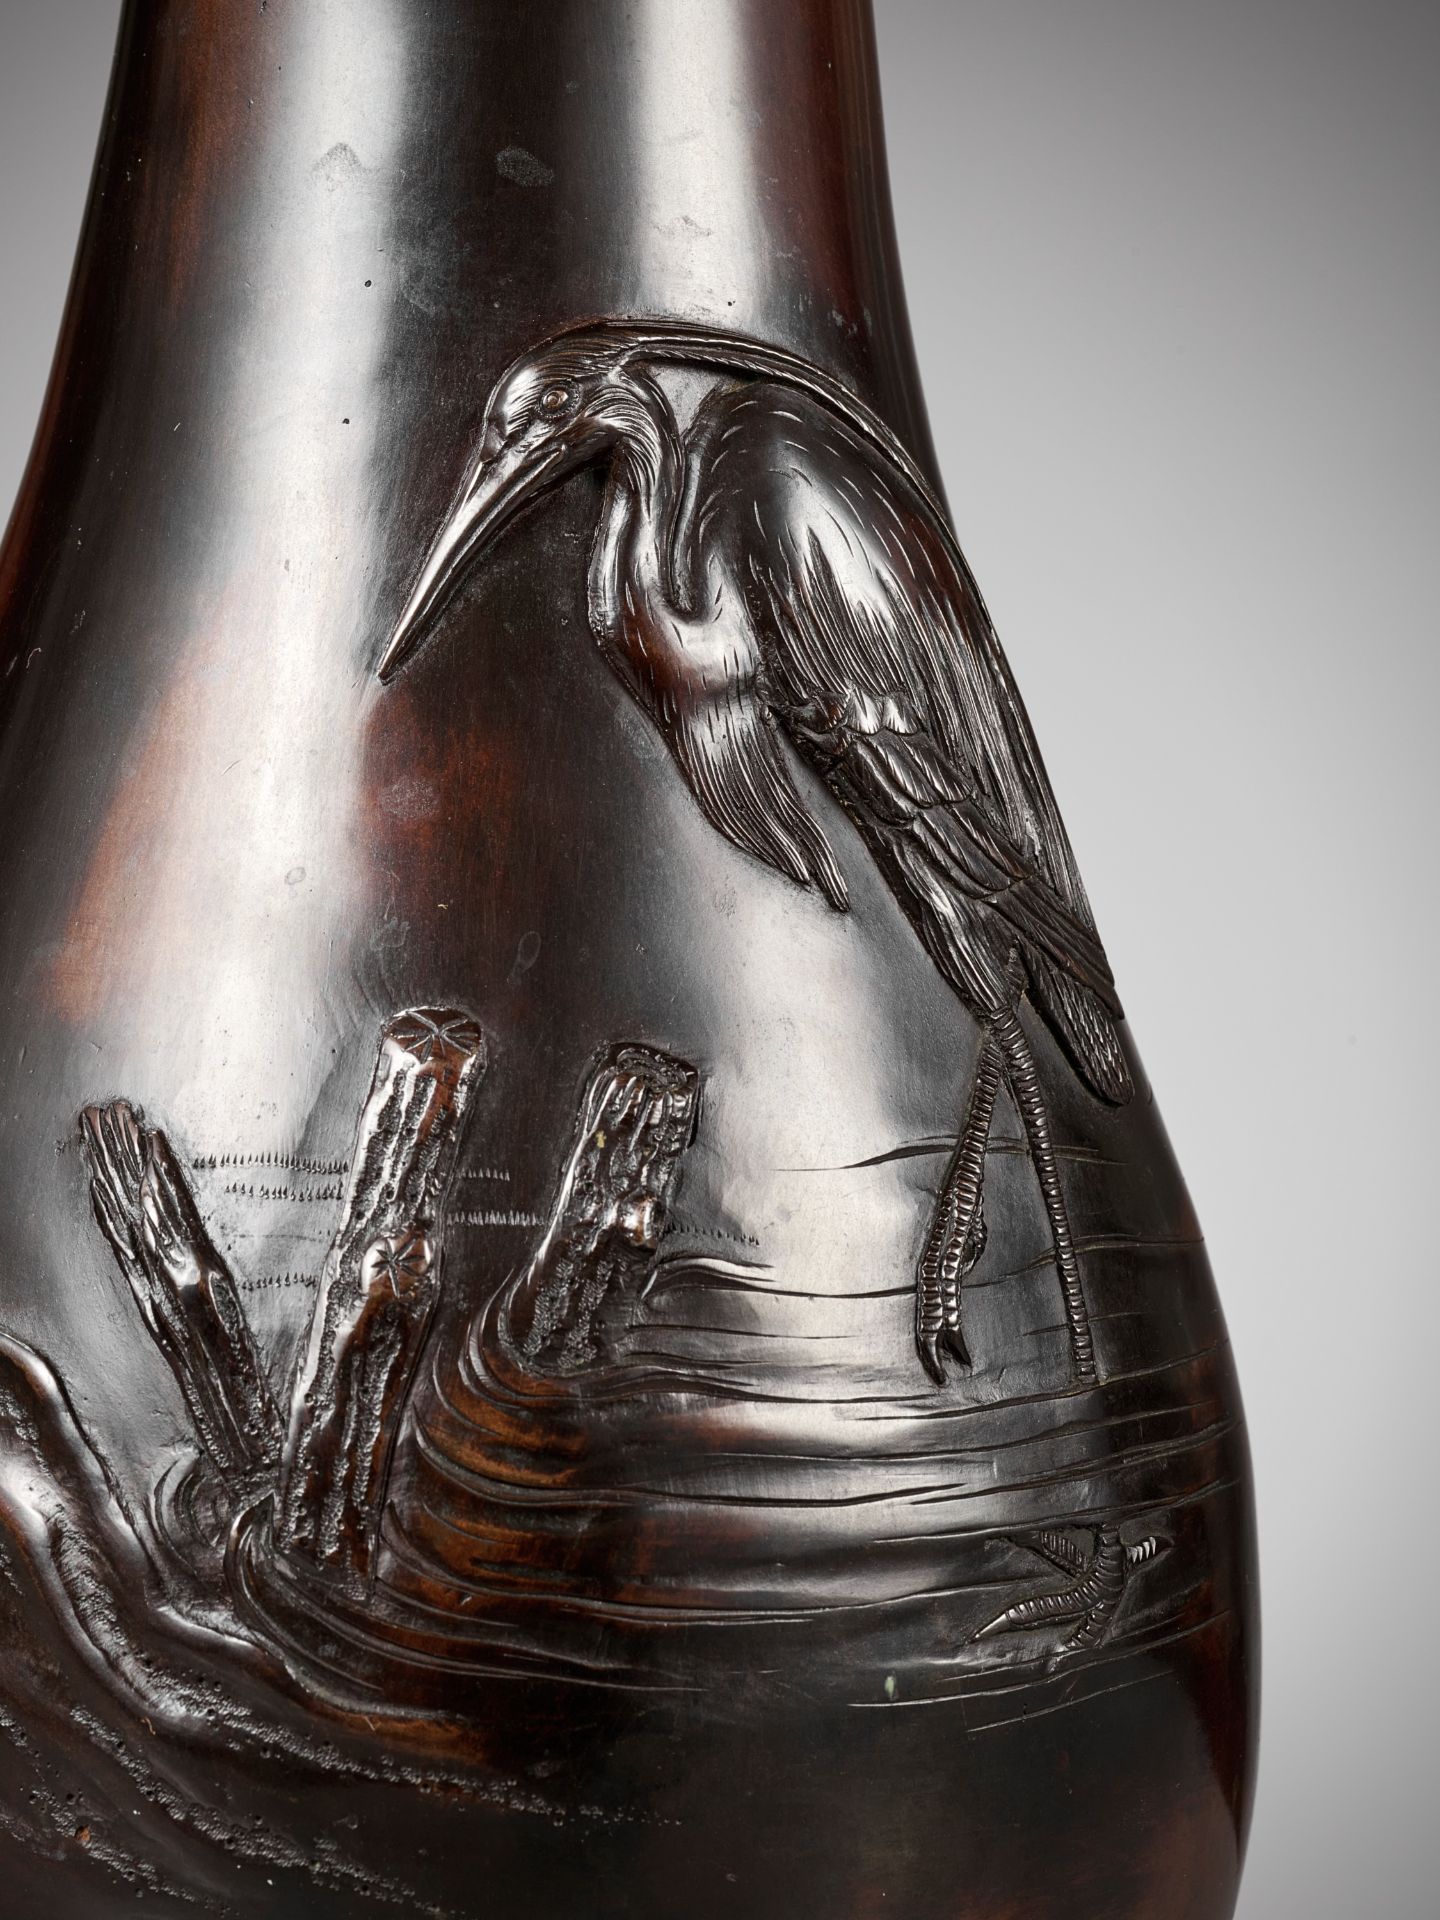 A PAIR OF BRONZE VASES DEPICTING EGRETS - Image 2 of 8